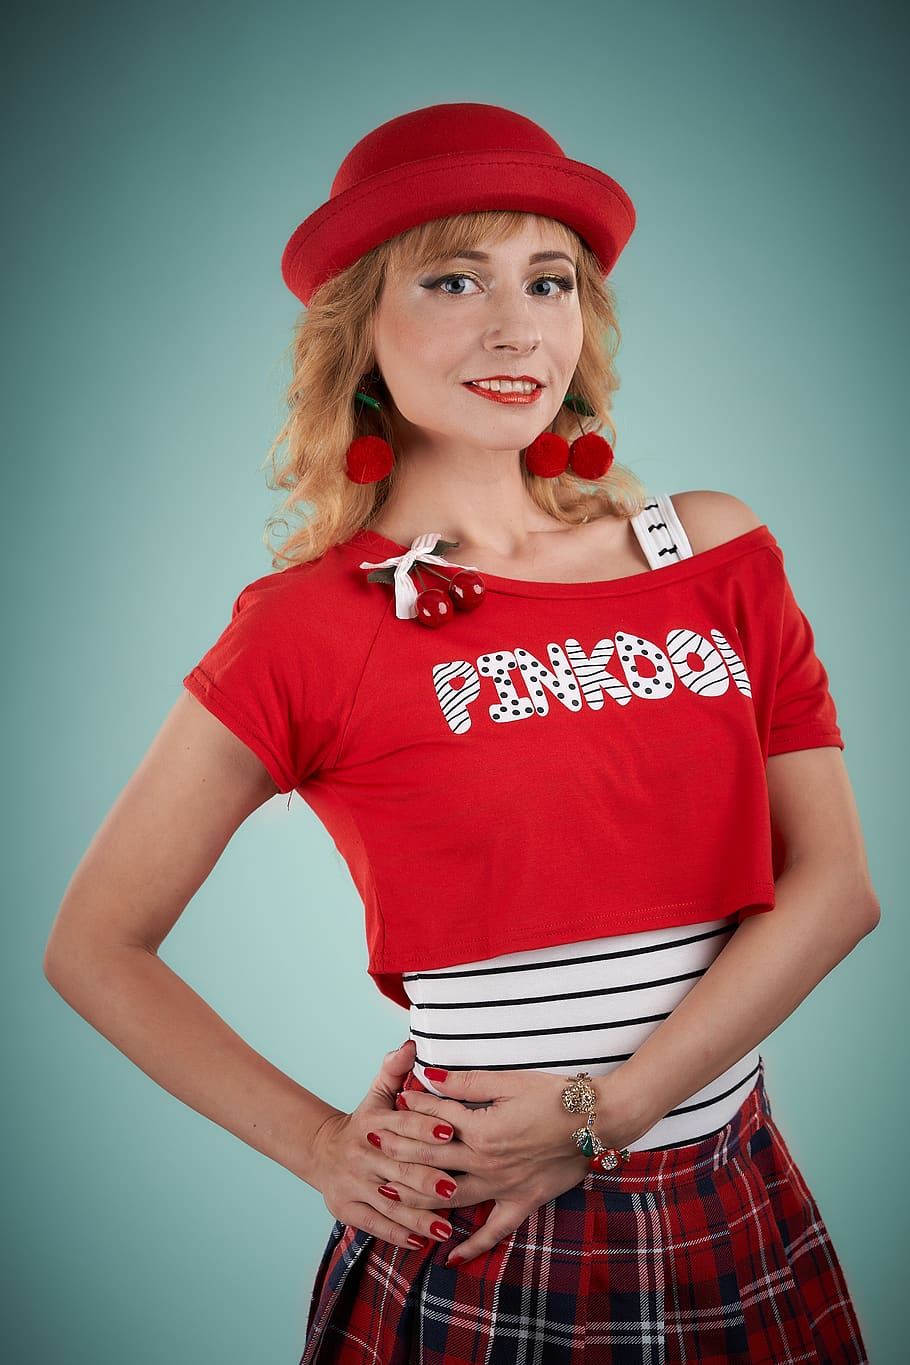 plaid skirt, baby doll, provocatively, playfully, coquette, flirting, hat, lady in red, studio, studio portrait